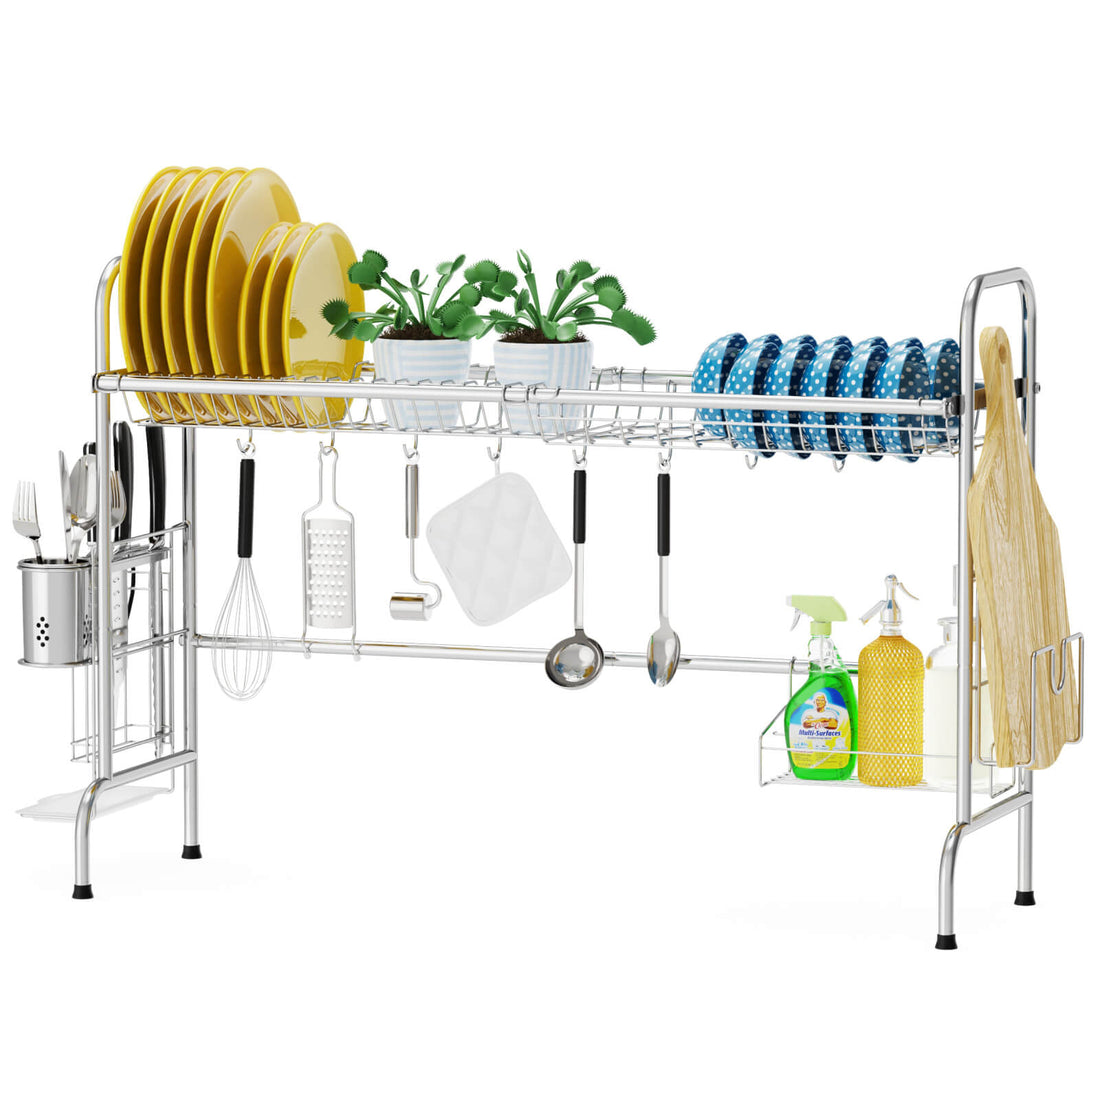 https://www.momjunction.com/wp-content/uploads/product-images/-ispecle-over-the-sink-dish-drying-rack_afl1257.jpg